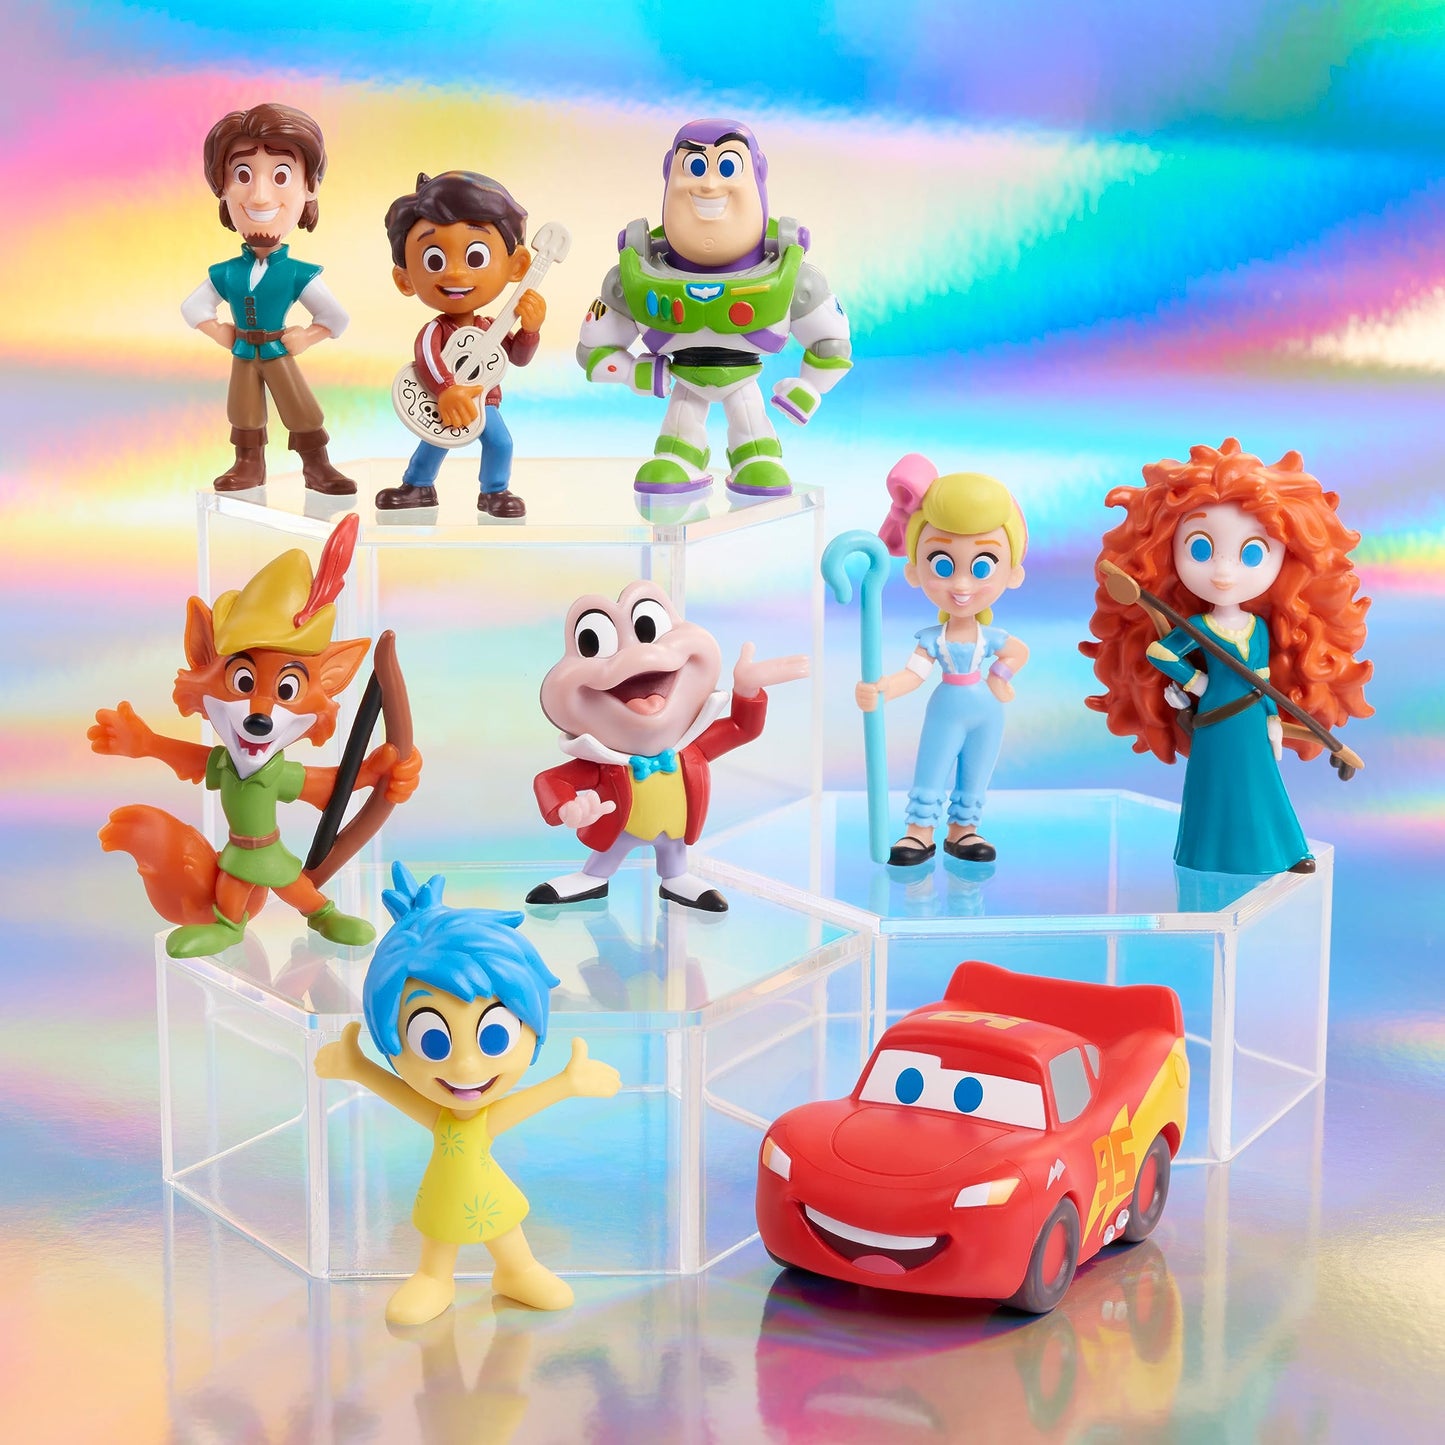 Disney100 Years of Spirited Adventures, Limited Edition 9-piece Figure Set, Officially Licensed Kids Toys for Ages 3 Up by Just Play